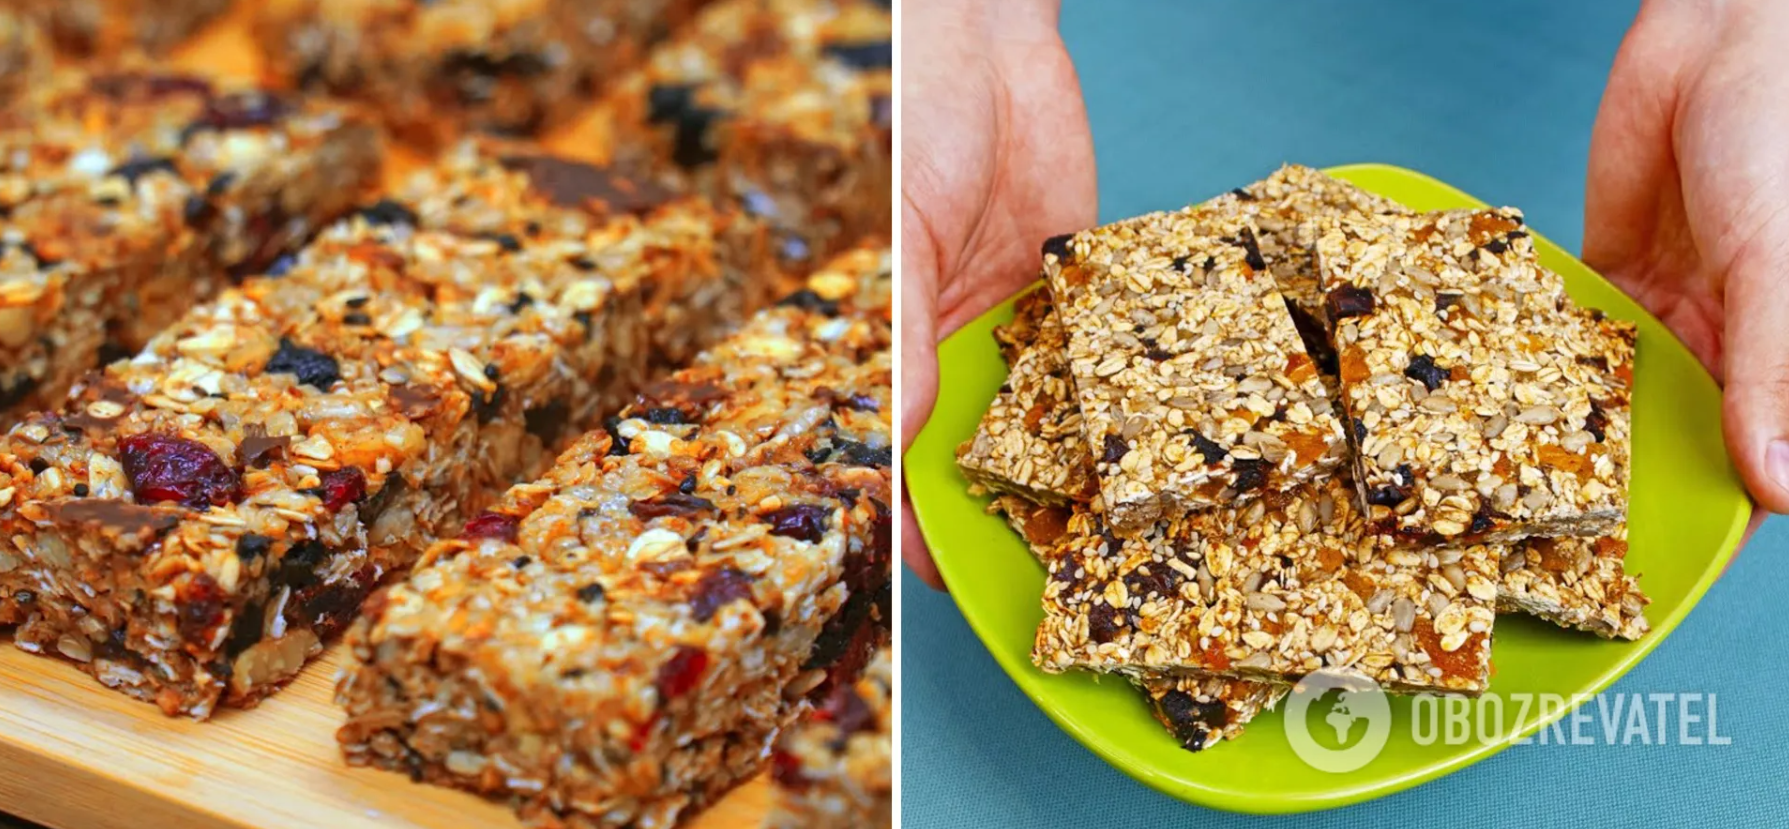 Dried fruit and nut bars